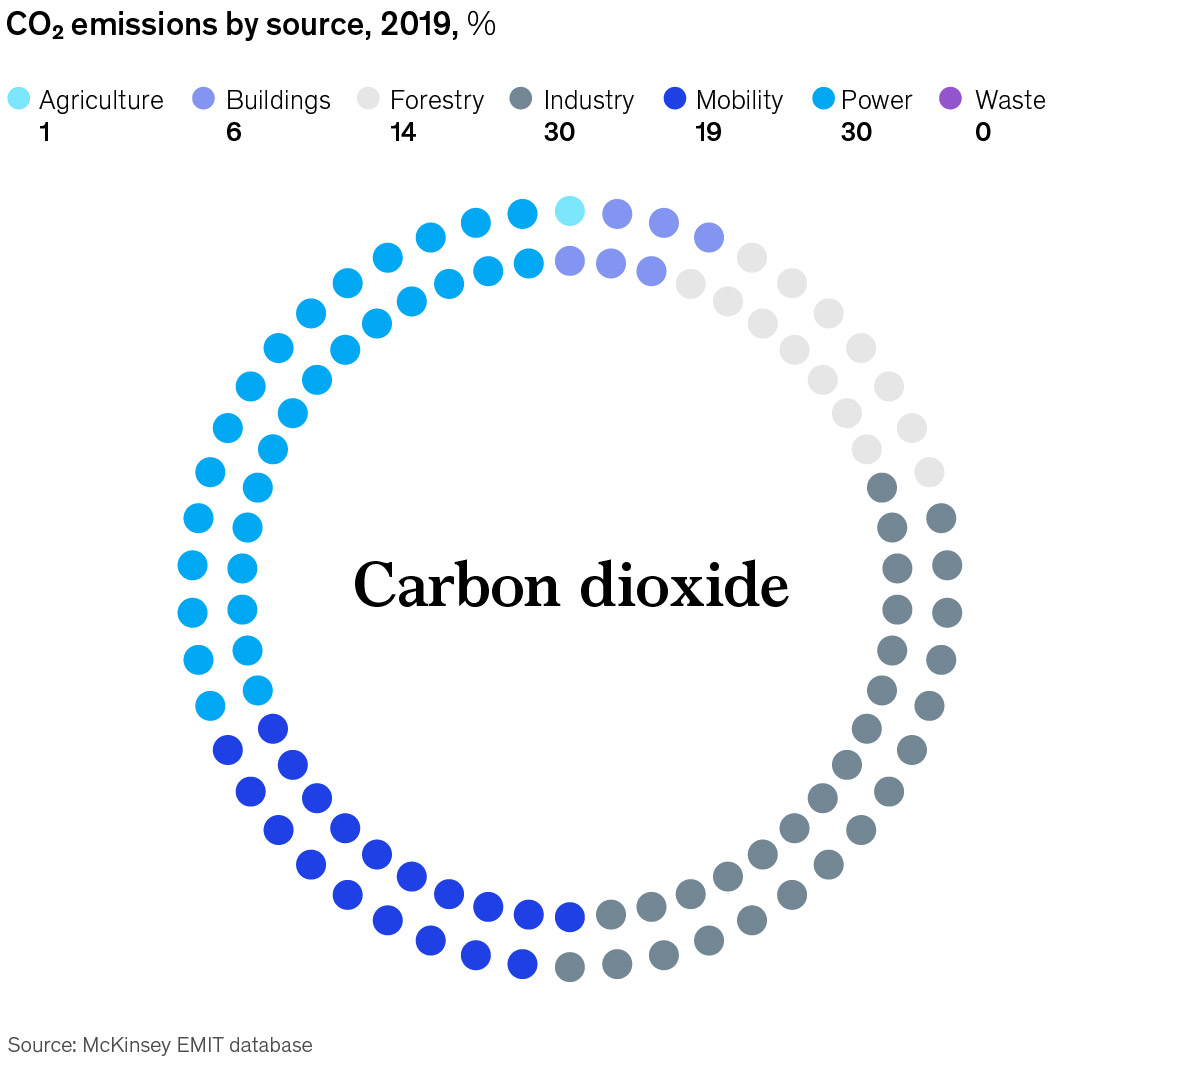 Carbon dioxide emissions by source in 2019